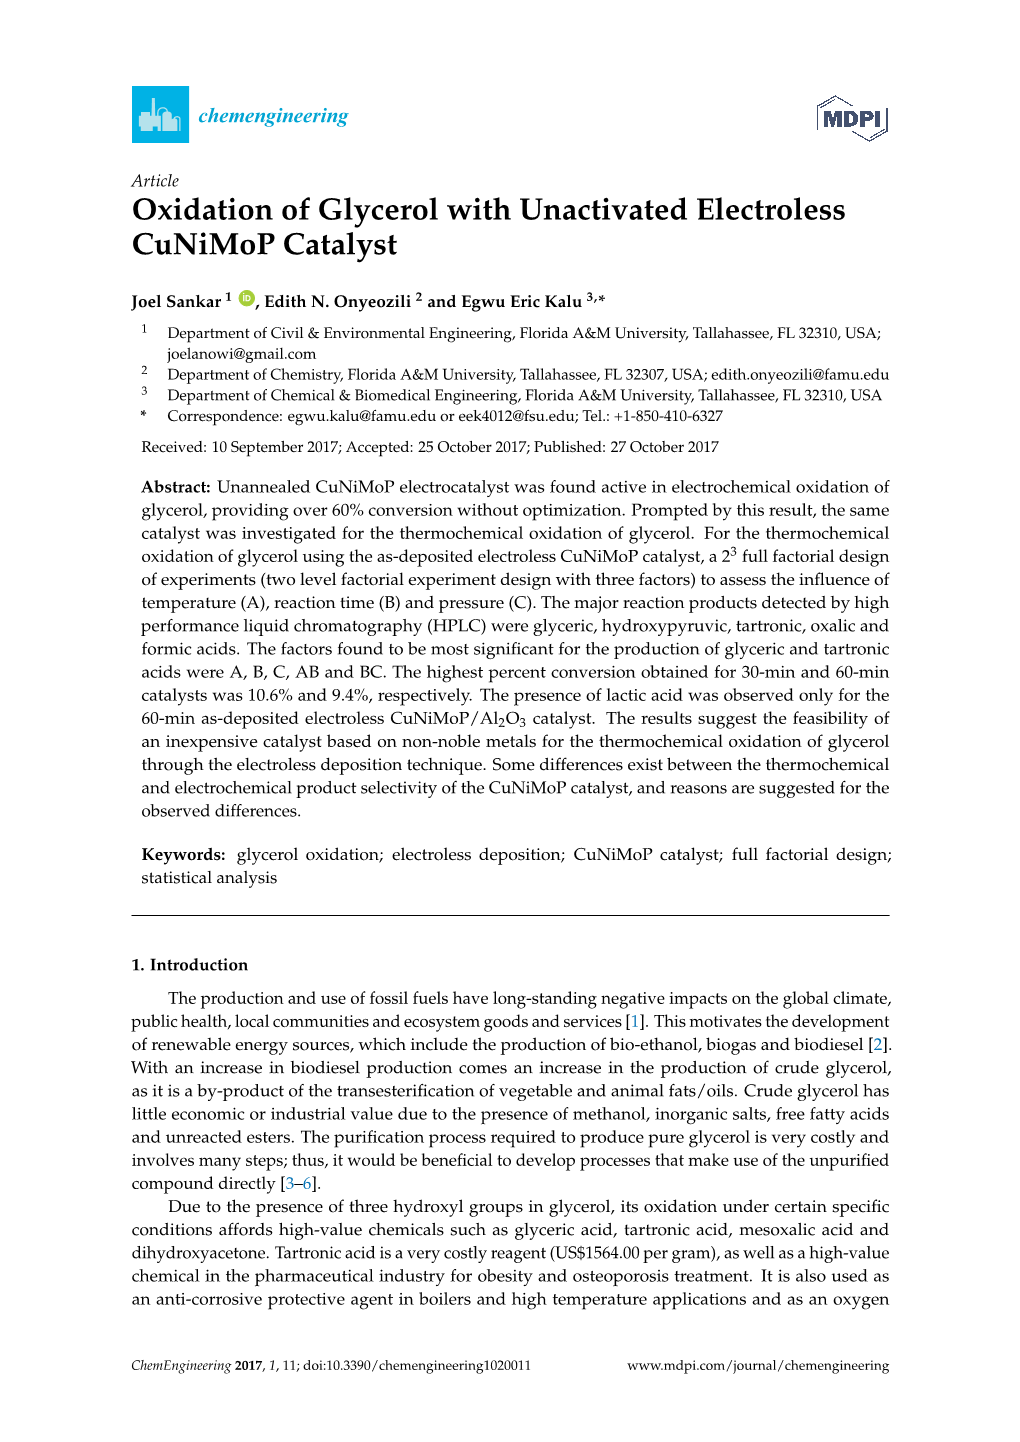 Oxidation of Glycerol with Unactivated Electroless Cunimop Catalyst